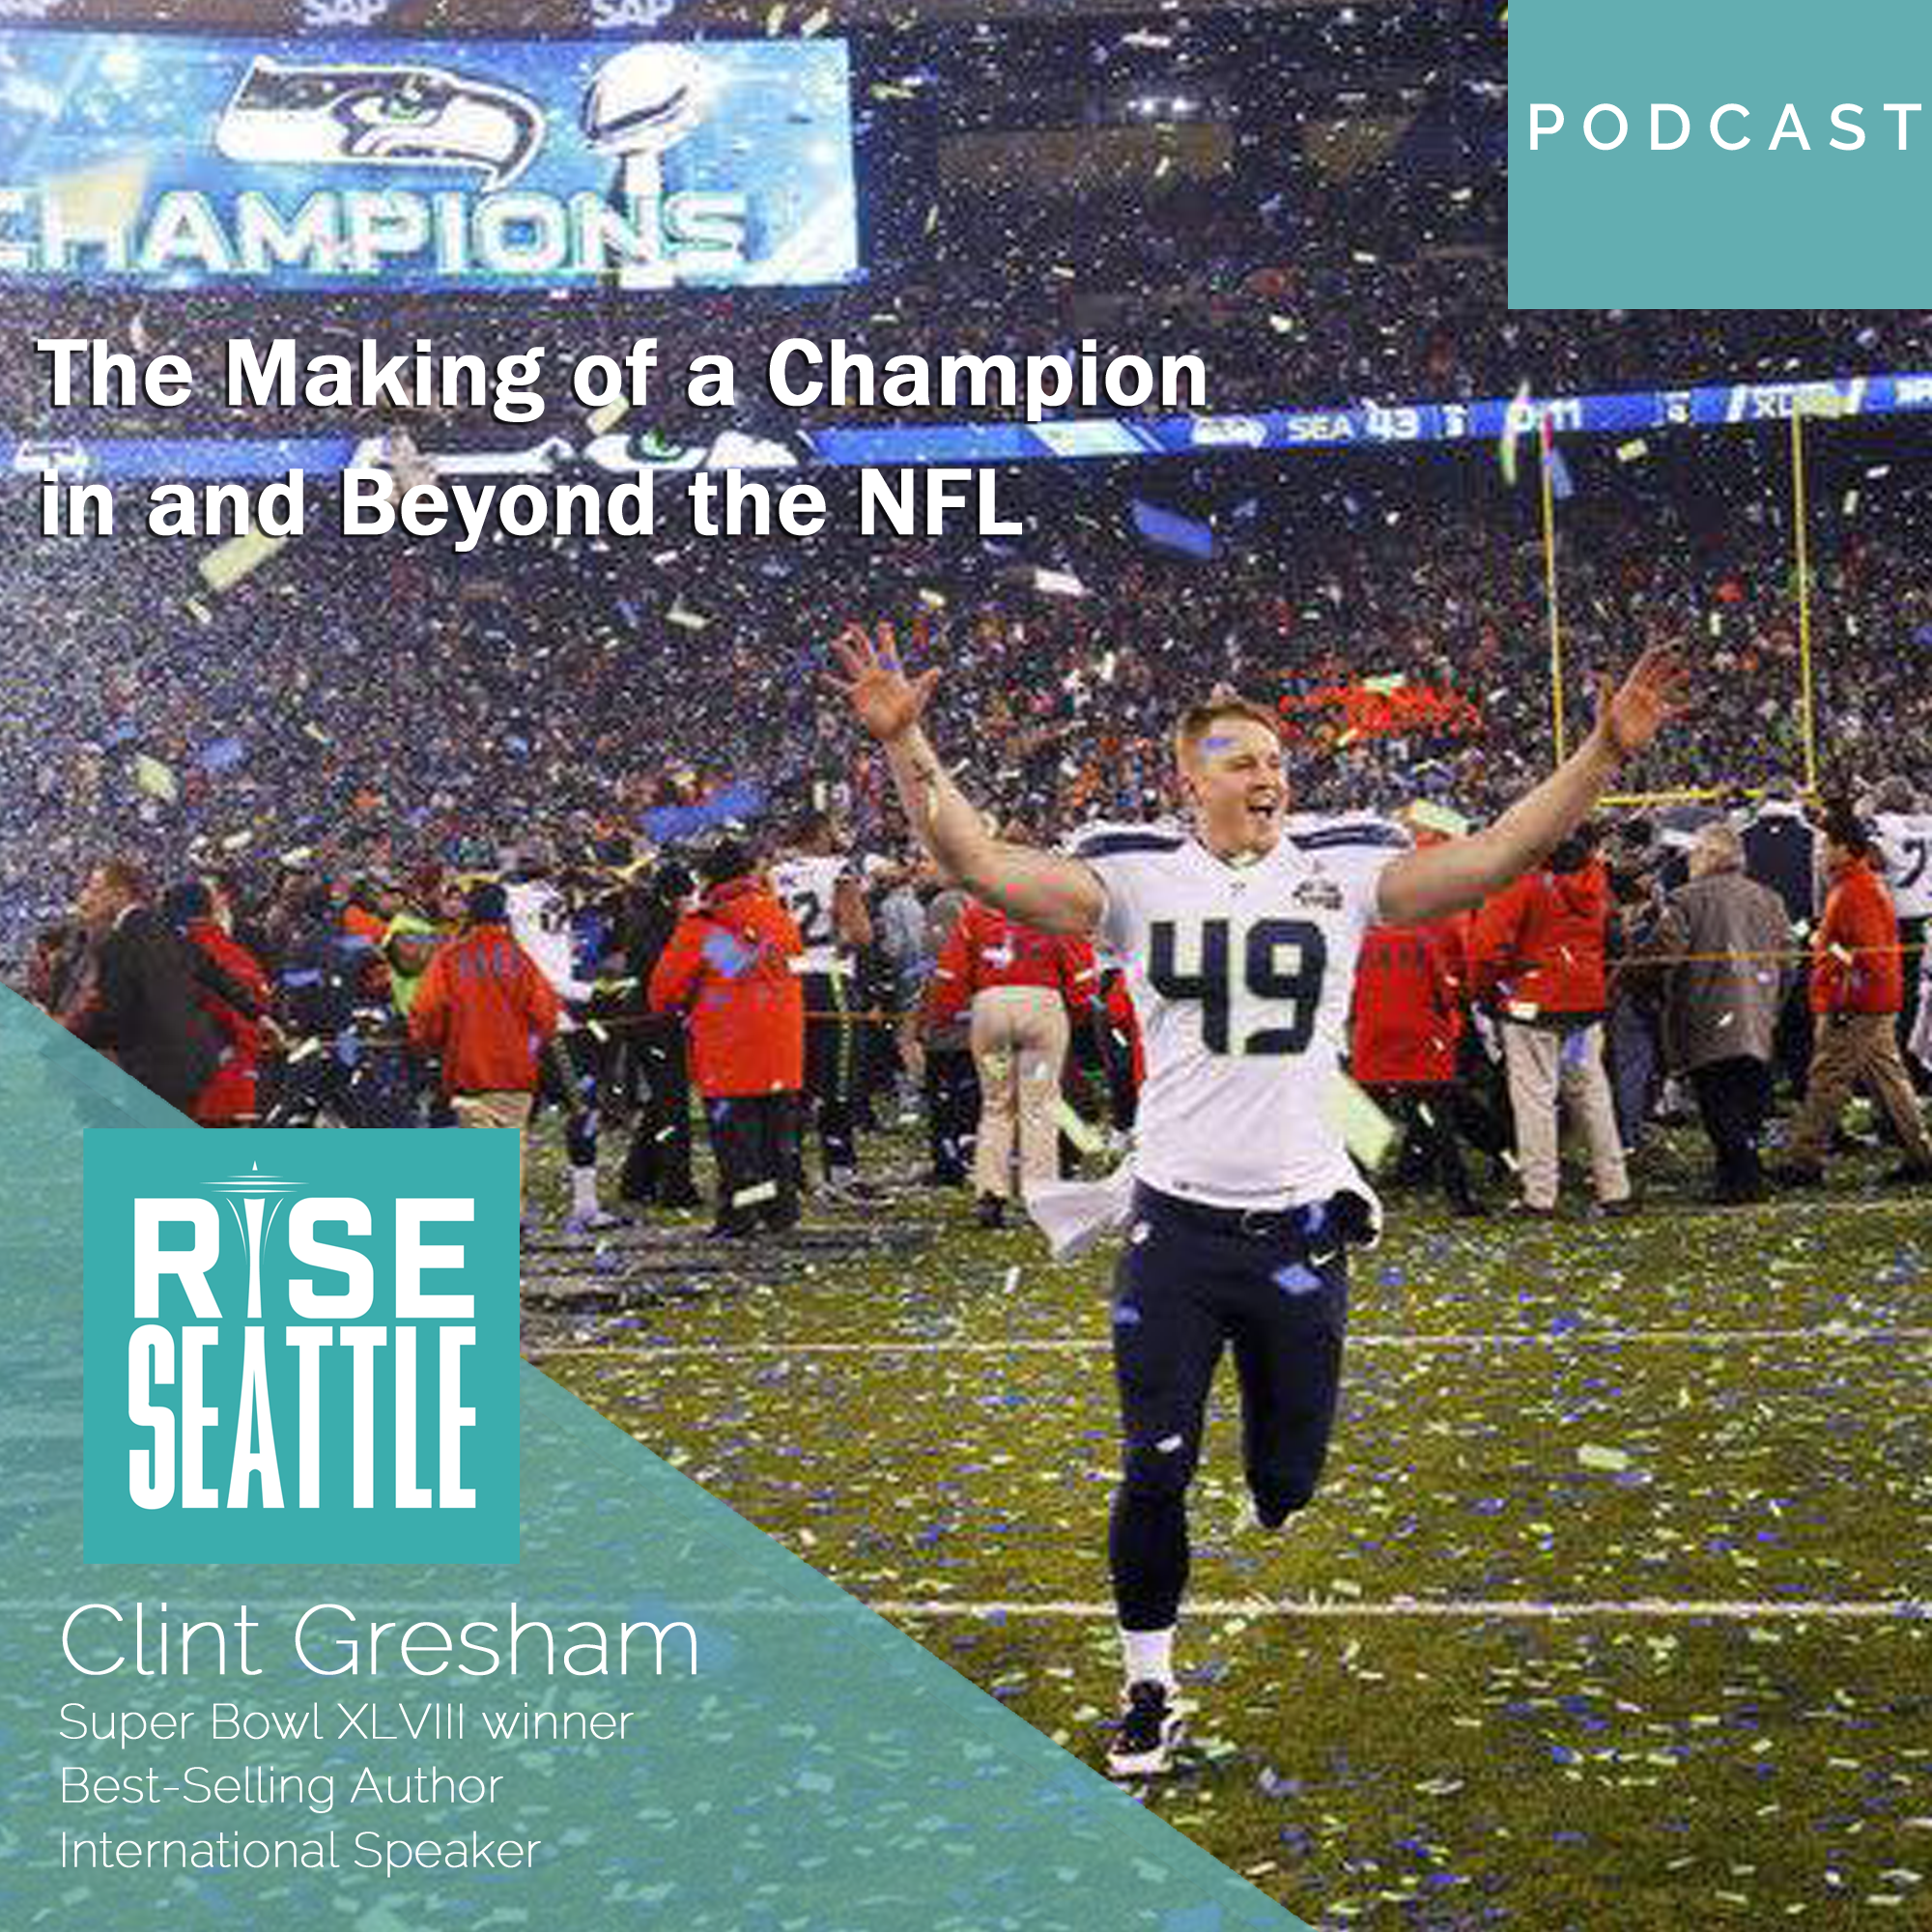 S2 E6: Clint Gresham: The Making of a Champion in and Beyond the NFL